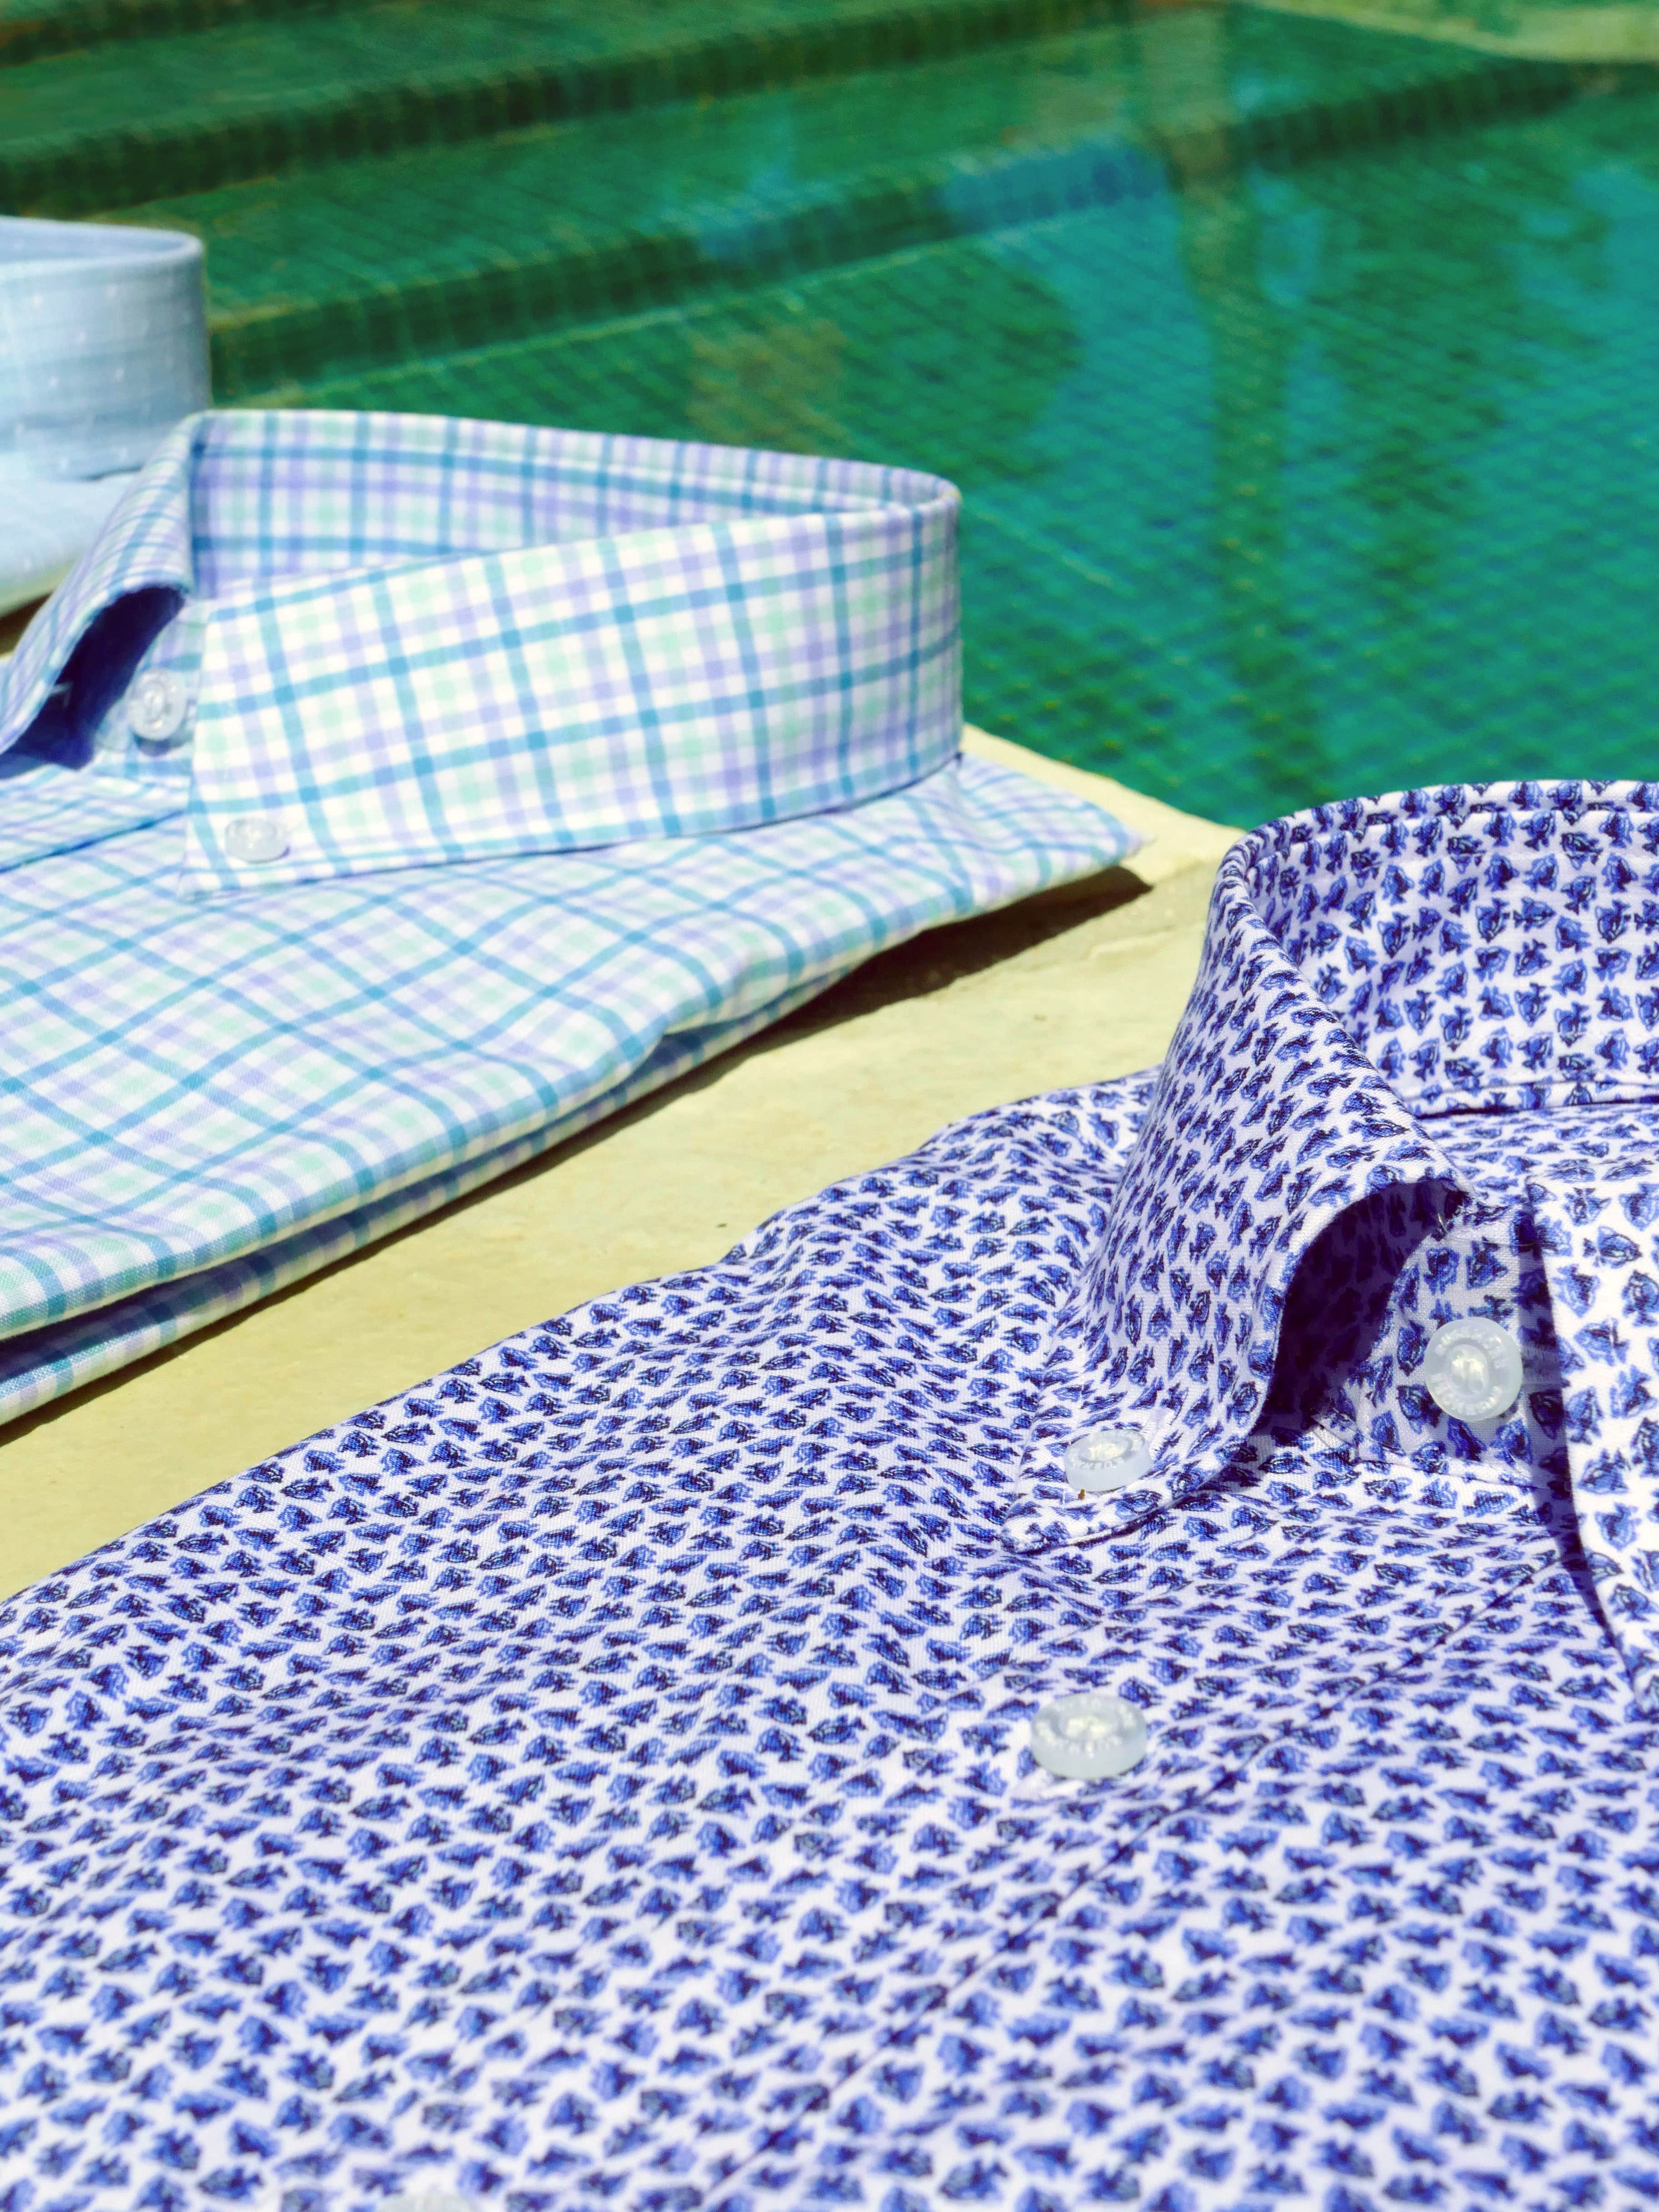 image of shirts by the pool